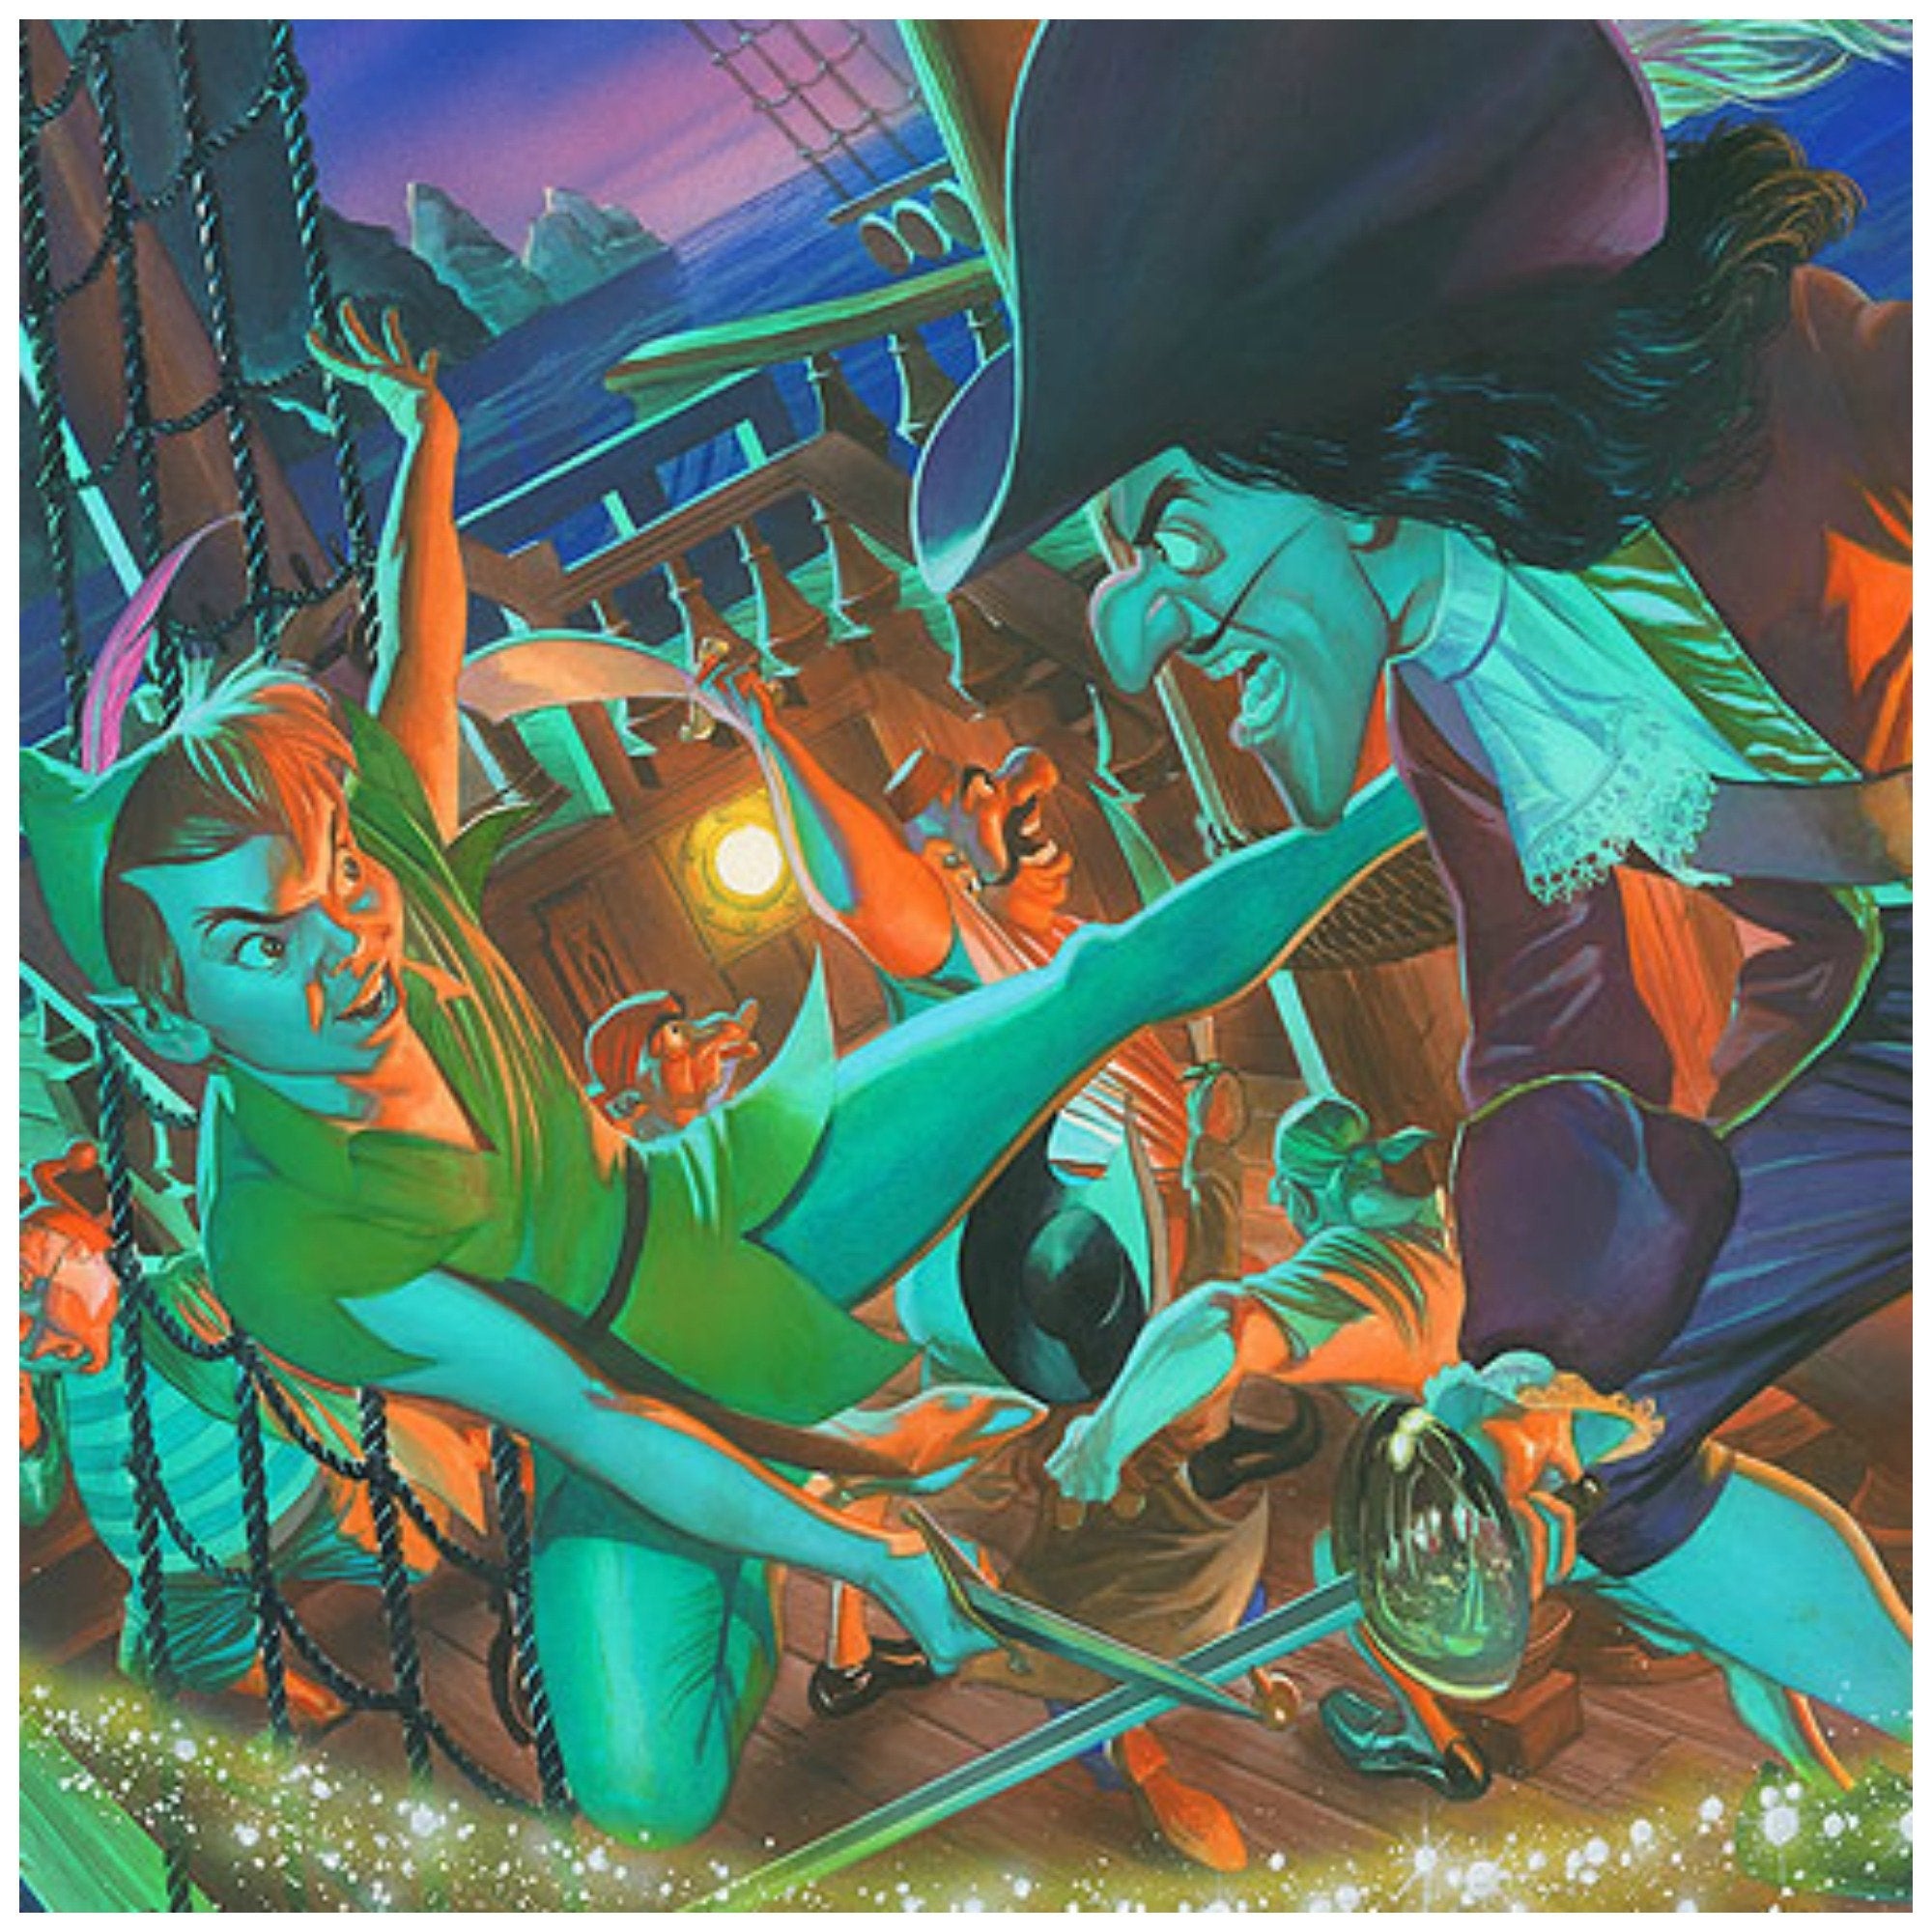 Clash for Neverland by Alex Ross Peter Pan, and Captain Hook on board the pirate ship in a duel for Neverland, Tinker Bell leaves her fairy dust as she flys above them.